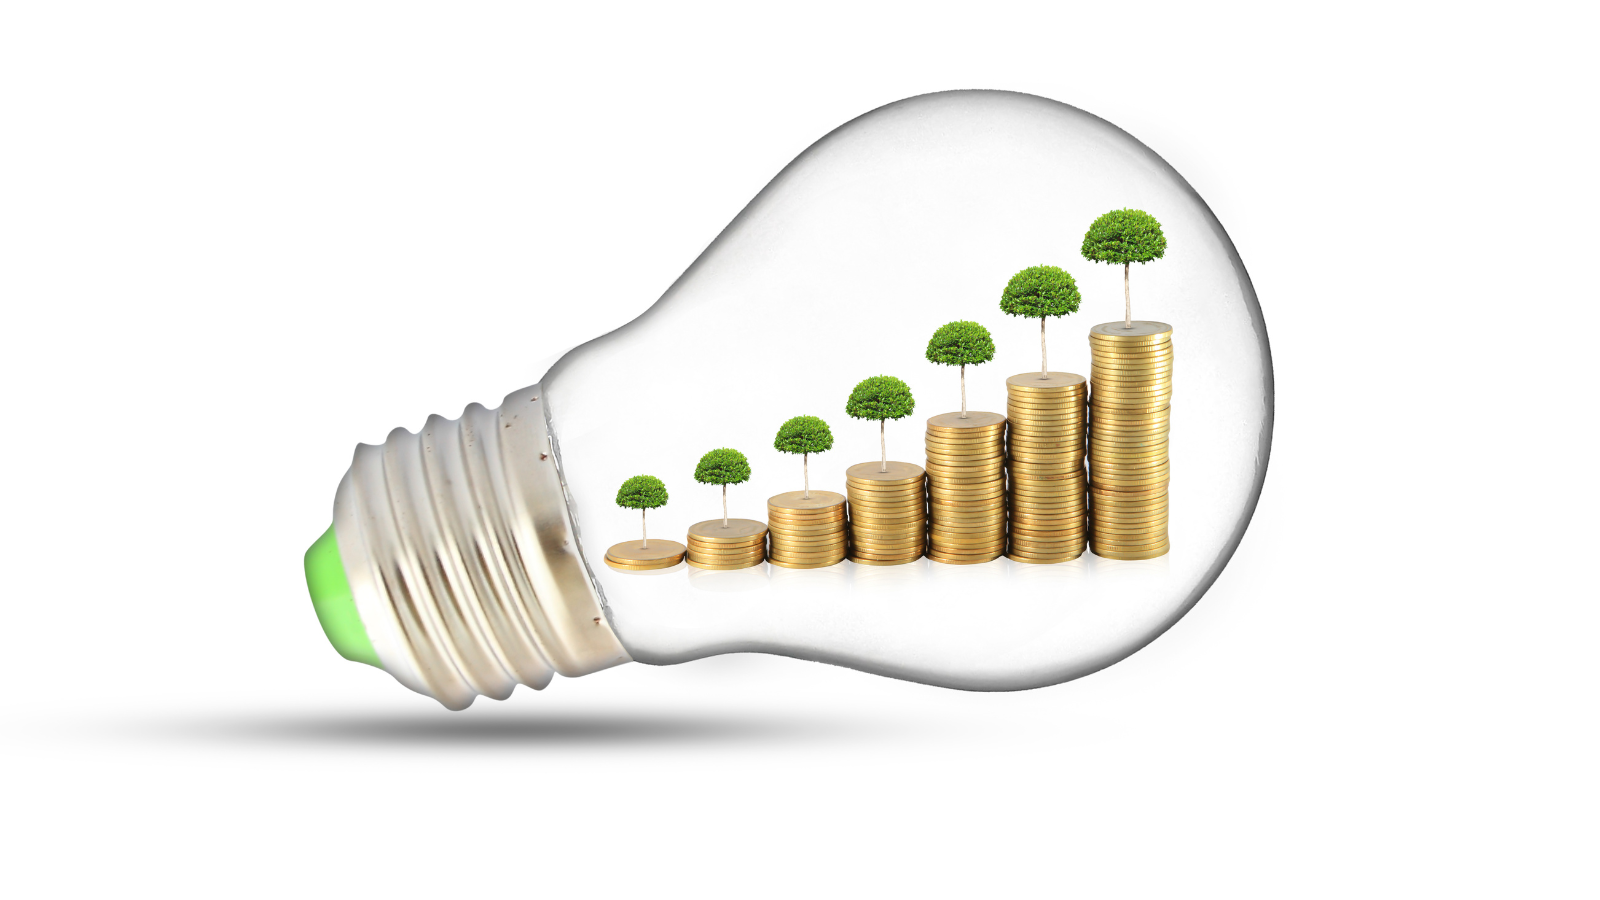 Best Money-Saving Tips for Small Business Owners shown with a light bulb and money saving trees